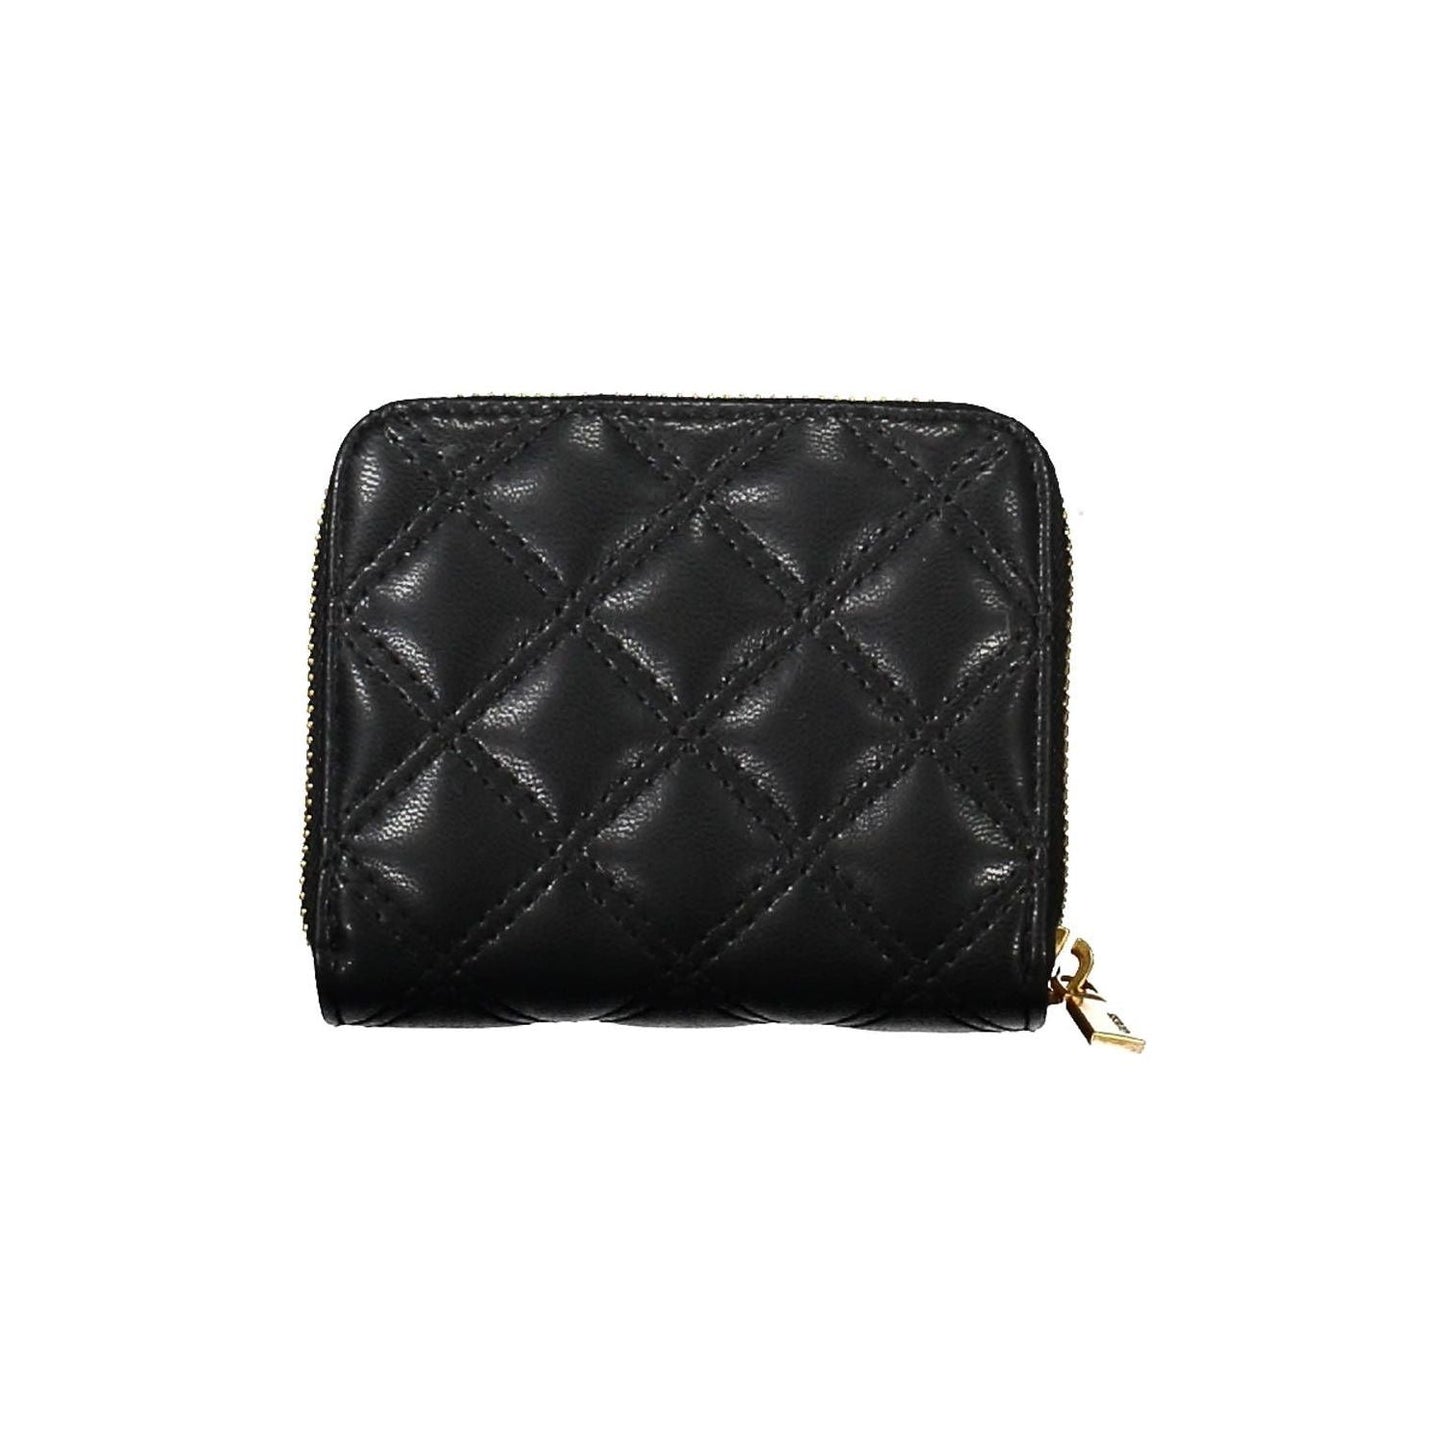 Guess Jeans Chic Black Wallet with Contrasting Details chic-black-wallet-with-contrasting-details